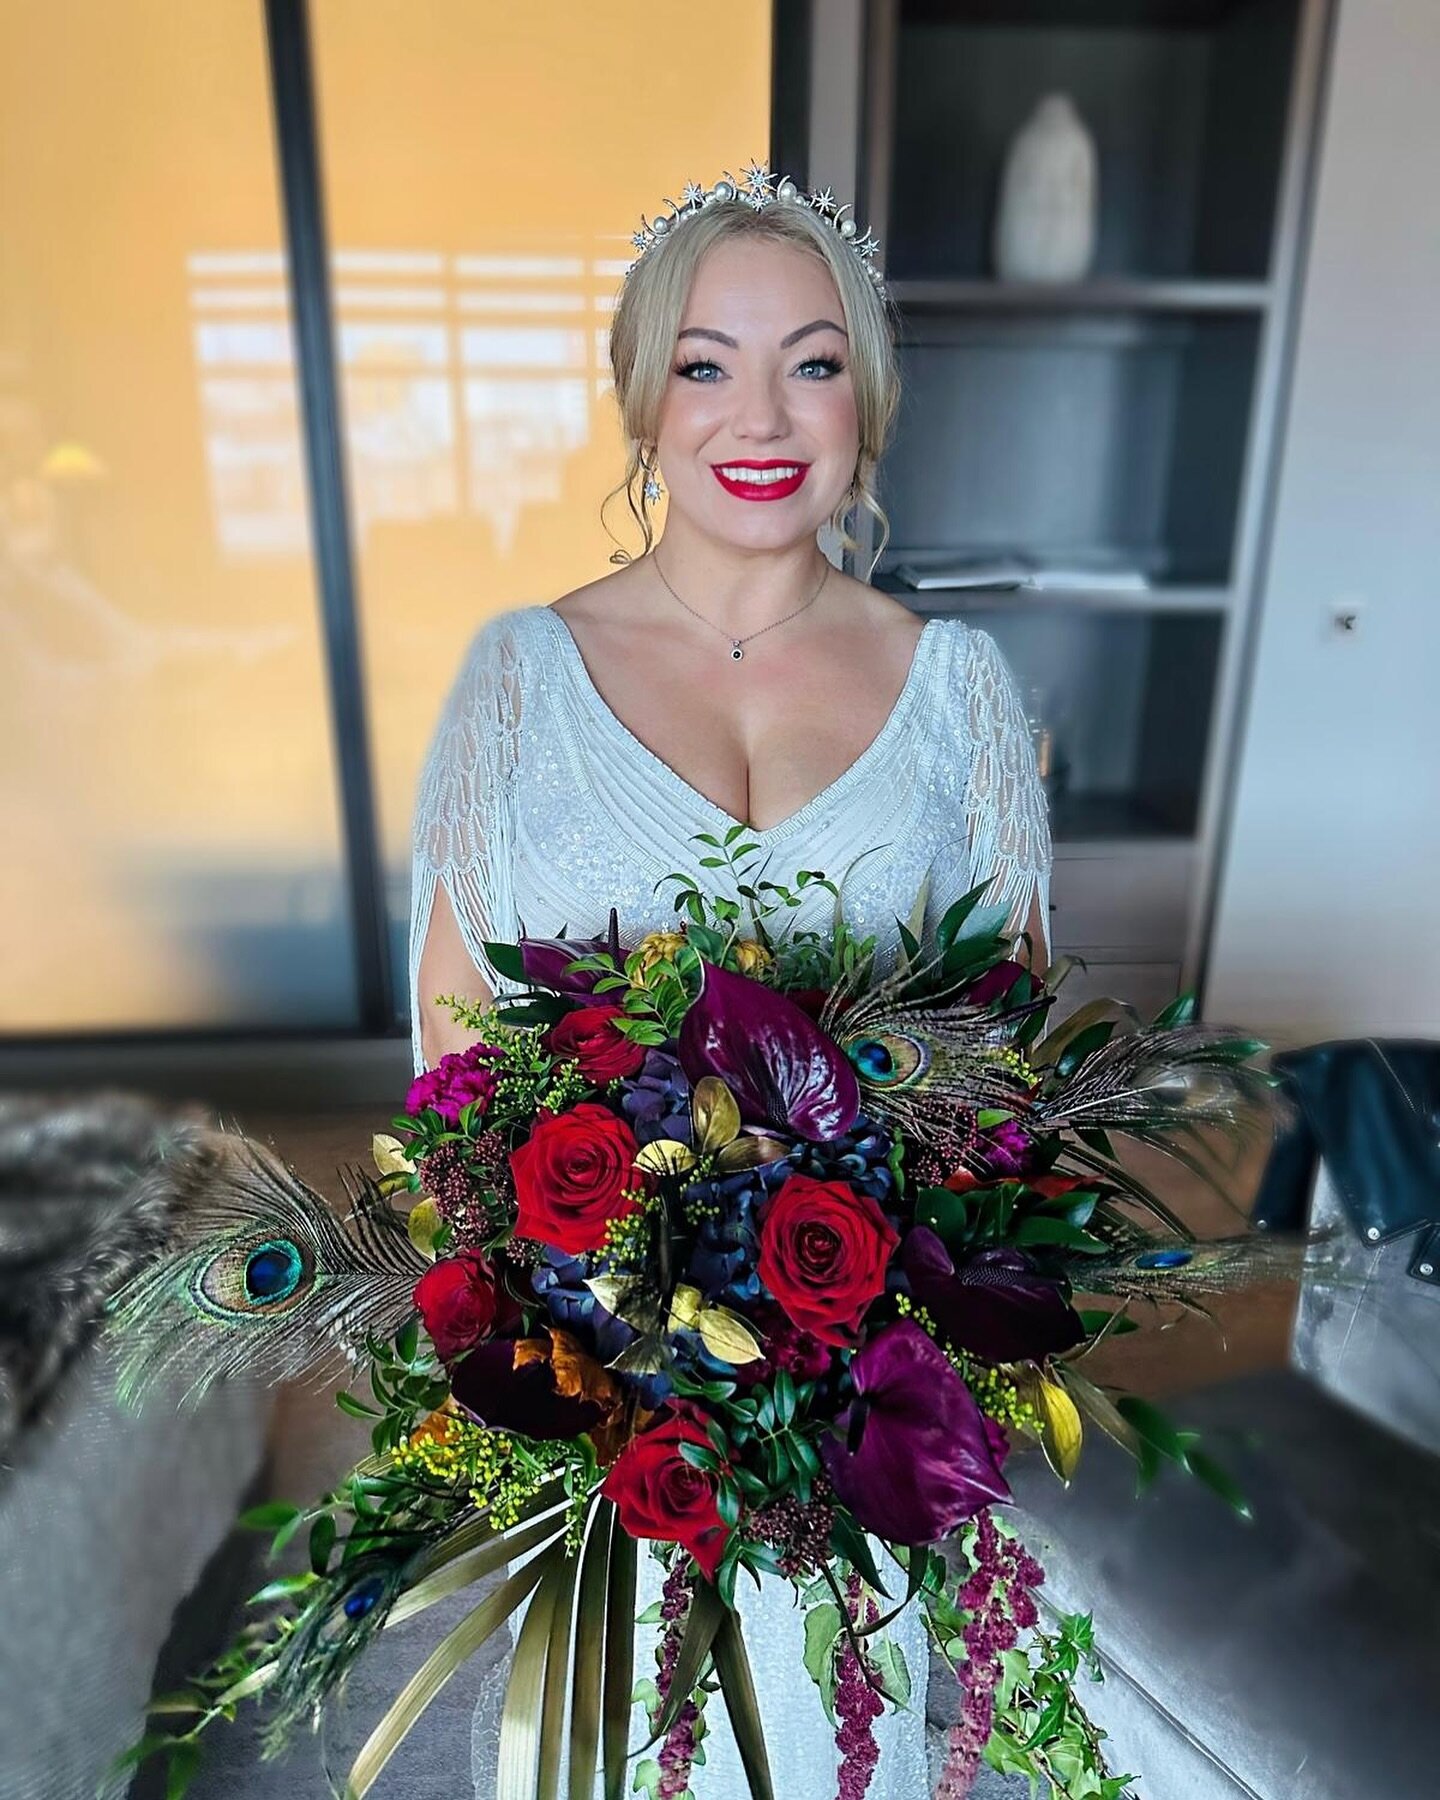 S A R A H ★

Dark-toned-jewel-themed wedding and absolutely RIGHT up Frankie&rsquo;s street 🤩. Sarah was just an absolute pleasure, she deserves all the happiness in the world ❤️💫. GORGE wedding and look how amazing she looks. Every single thing wo